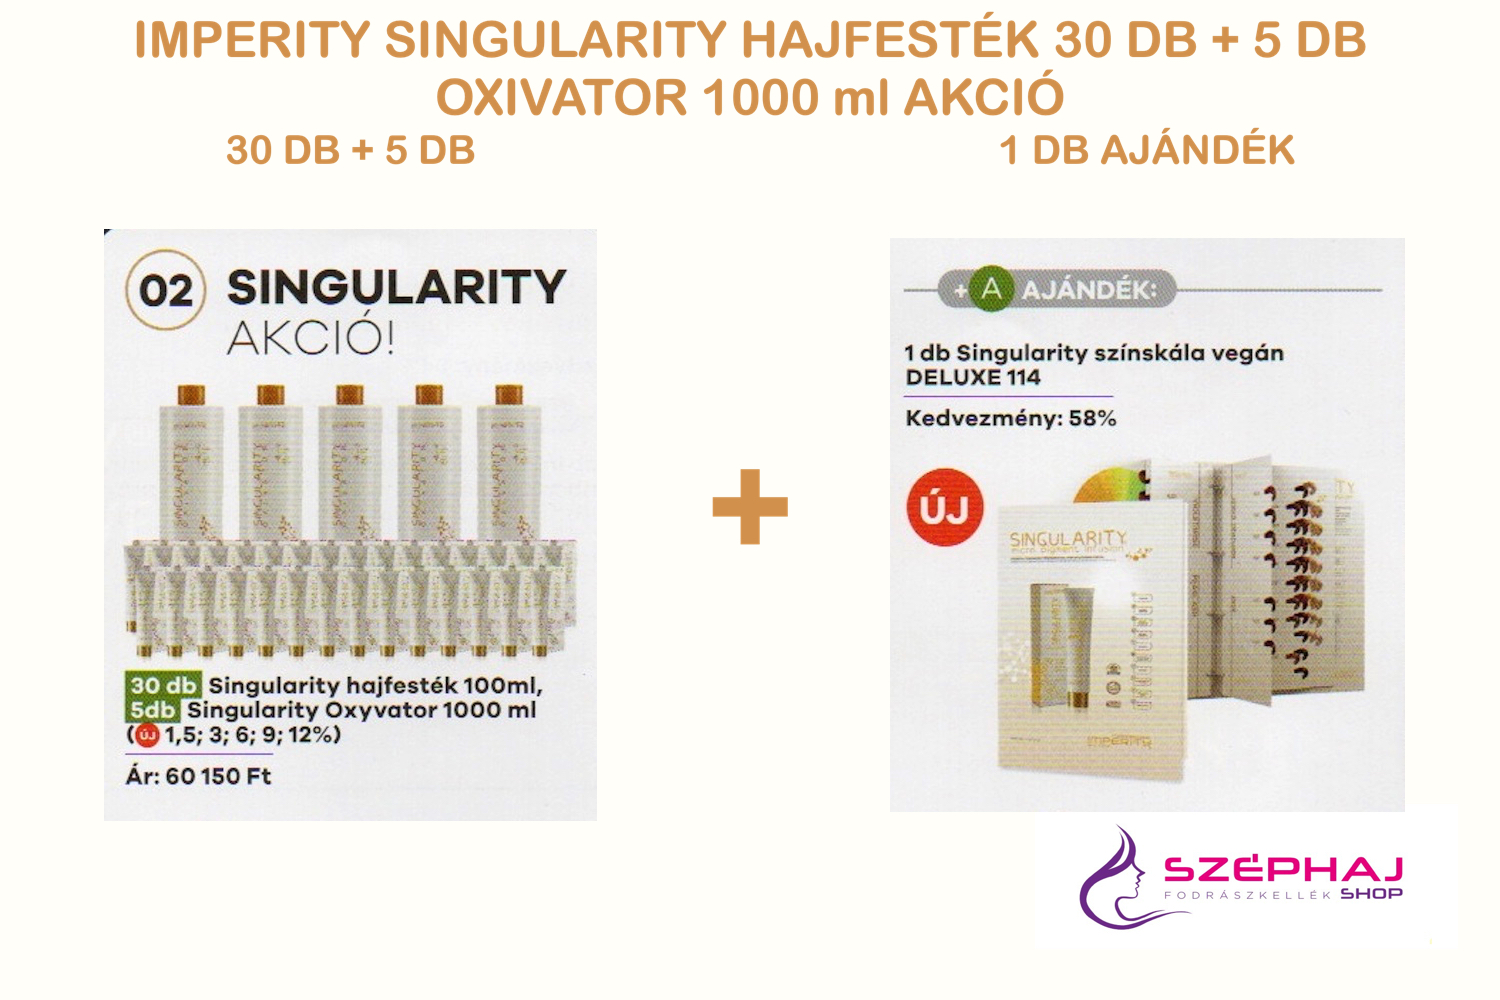 02A IMPERITY Singularity Hair Color 30 + 5 DB Oxivator AKCIÓ